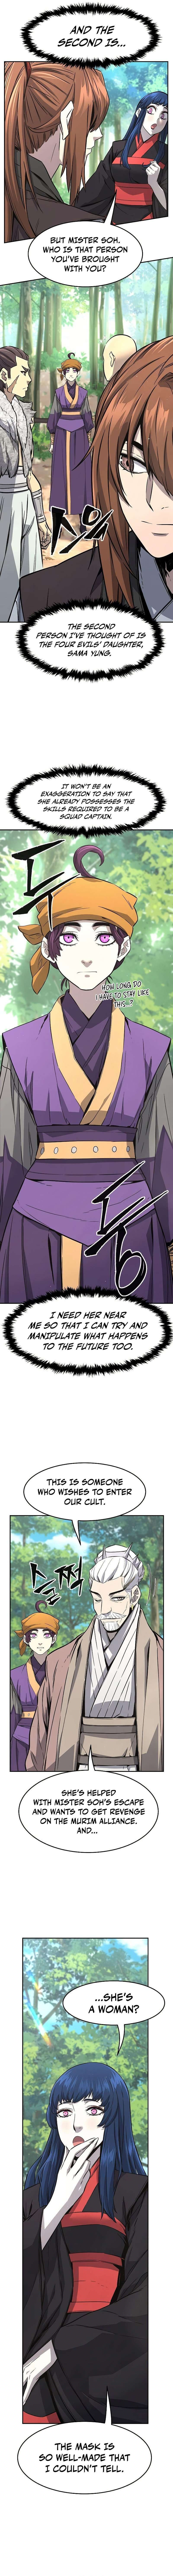 Absolute Sword Sense Chapter 53 page 6